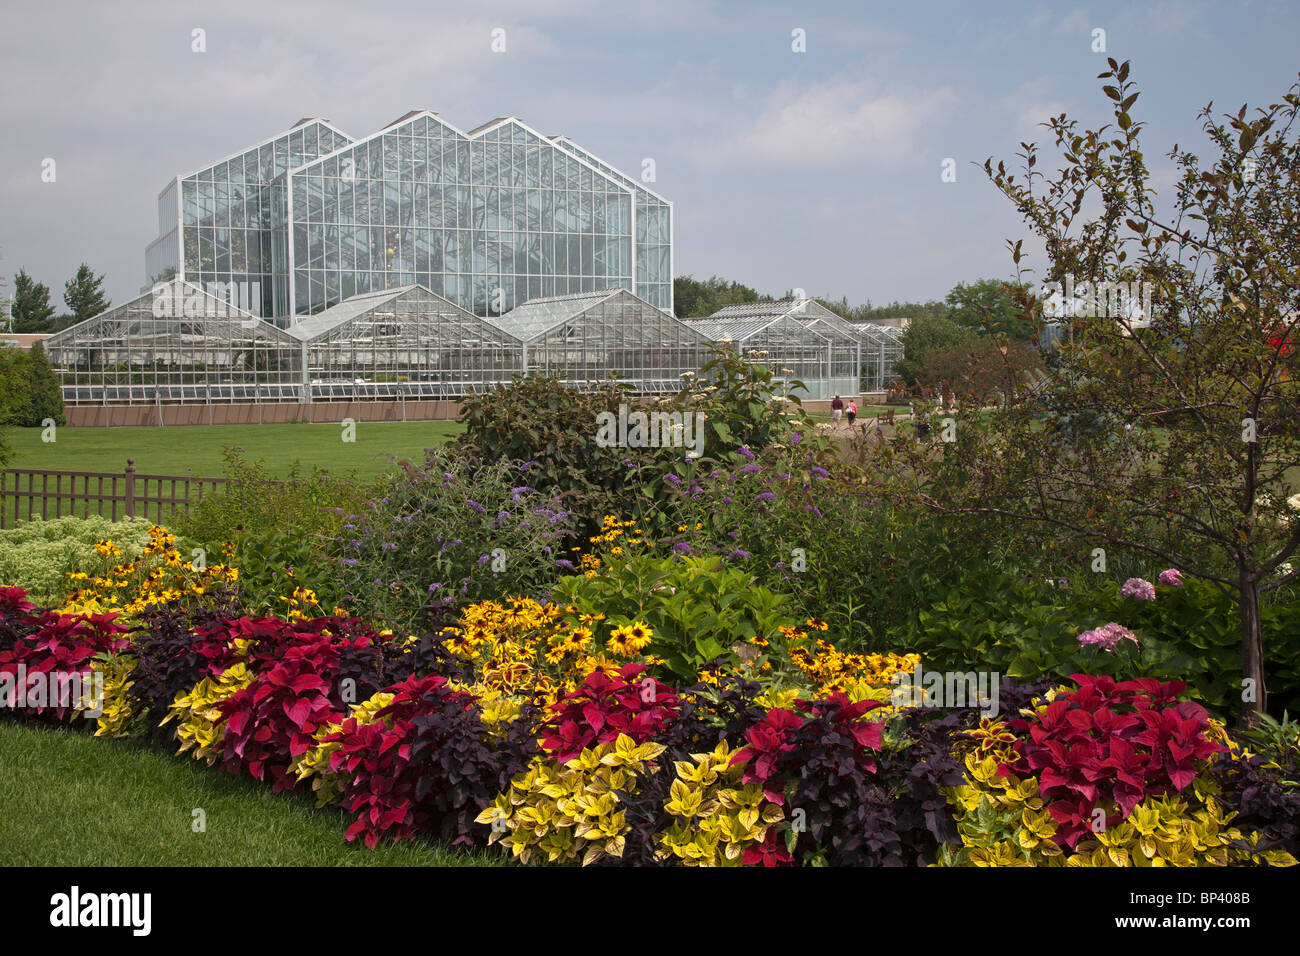 Grand Rapids, Michigan - The Lena Meijer Tropical Conservatory at the Frederik Meijer Gardens and Sculpture Park. Stock Photo